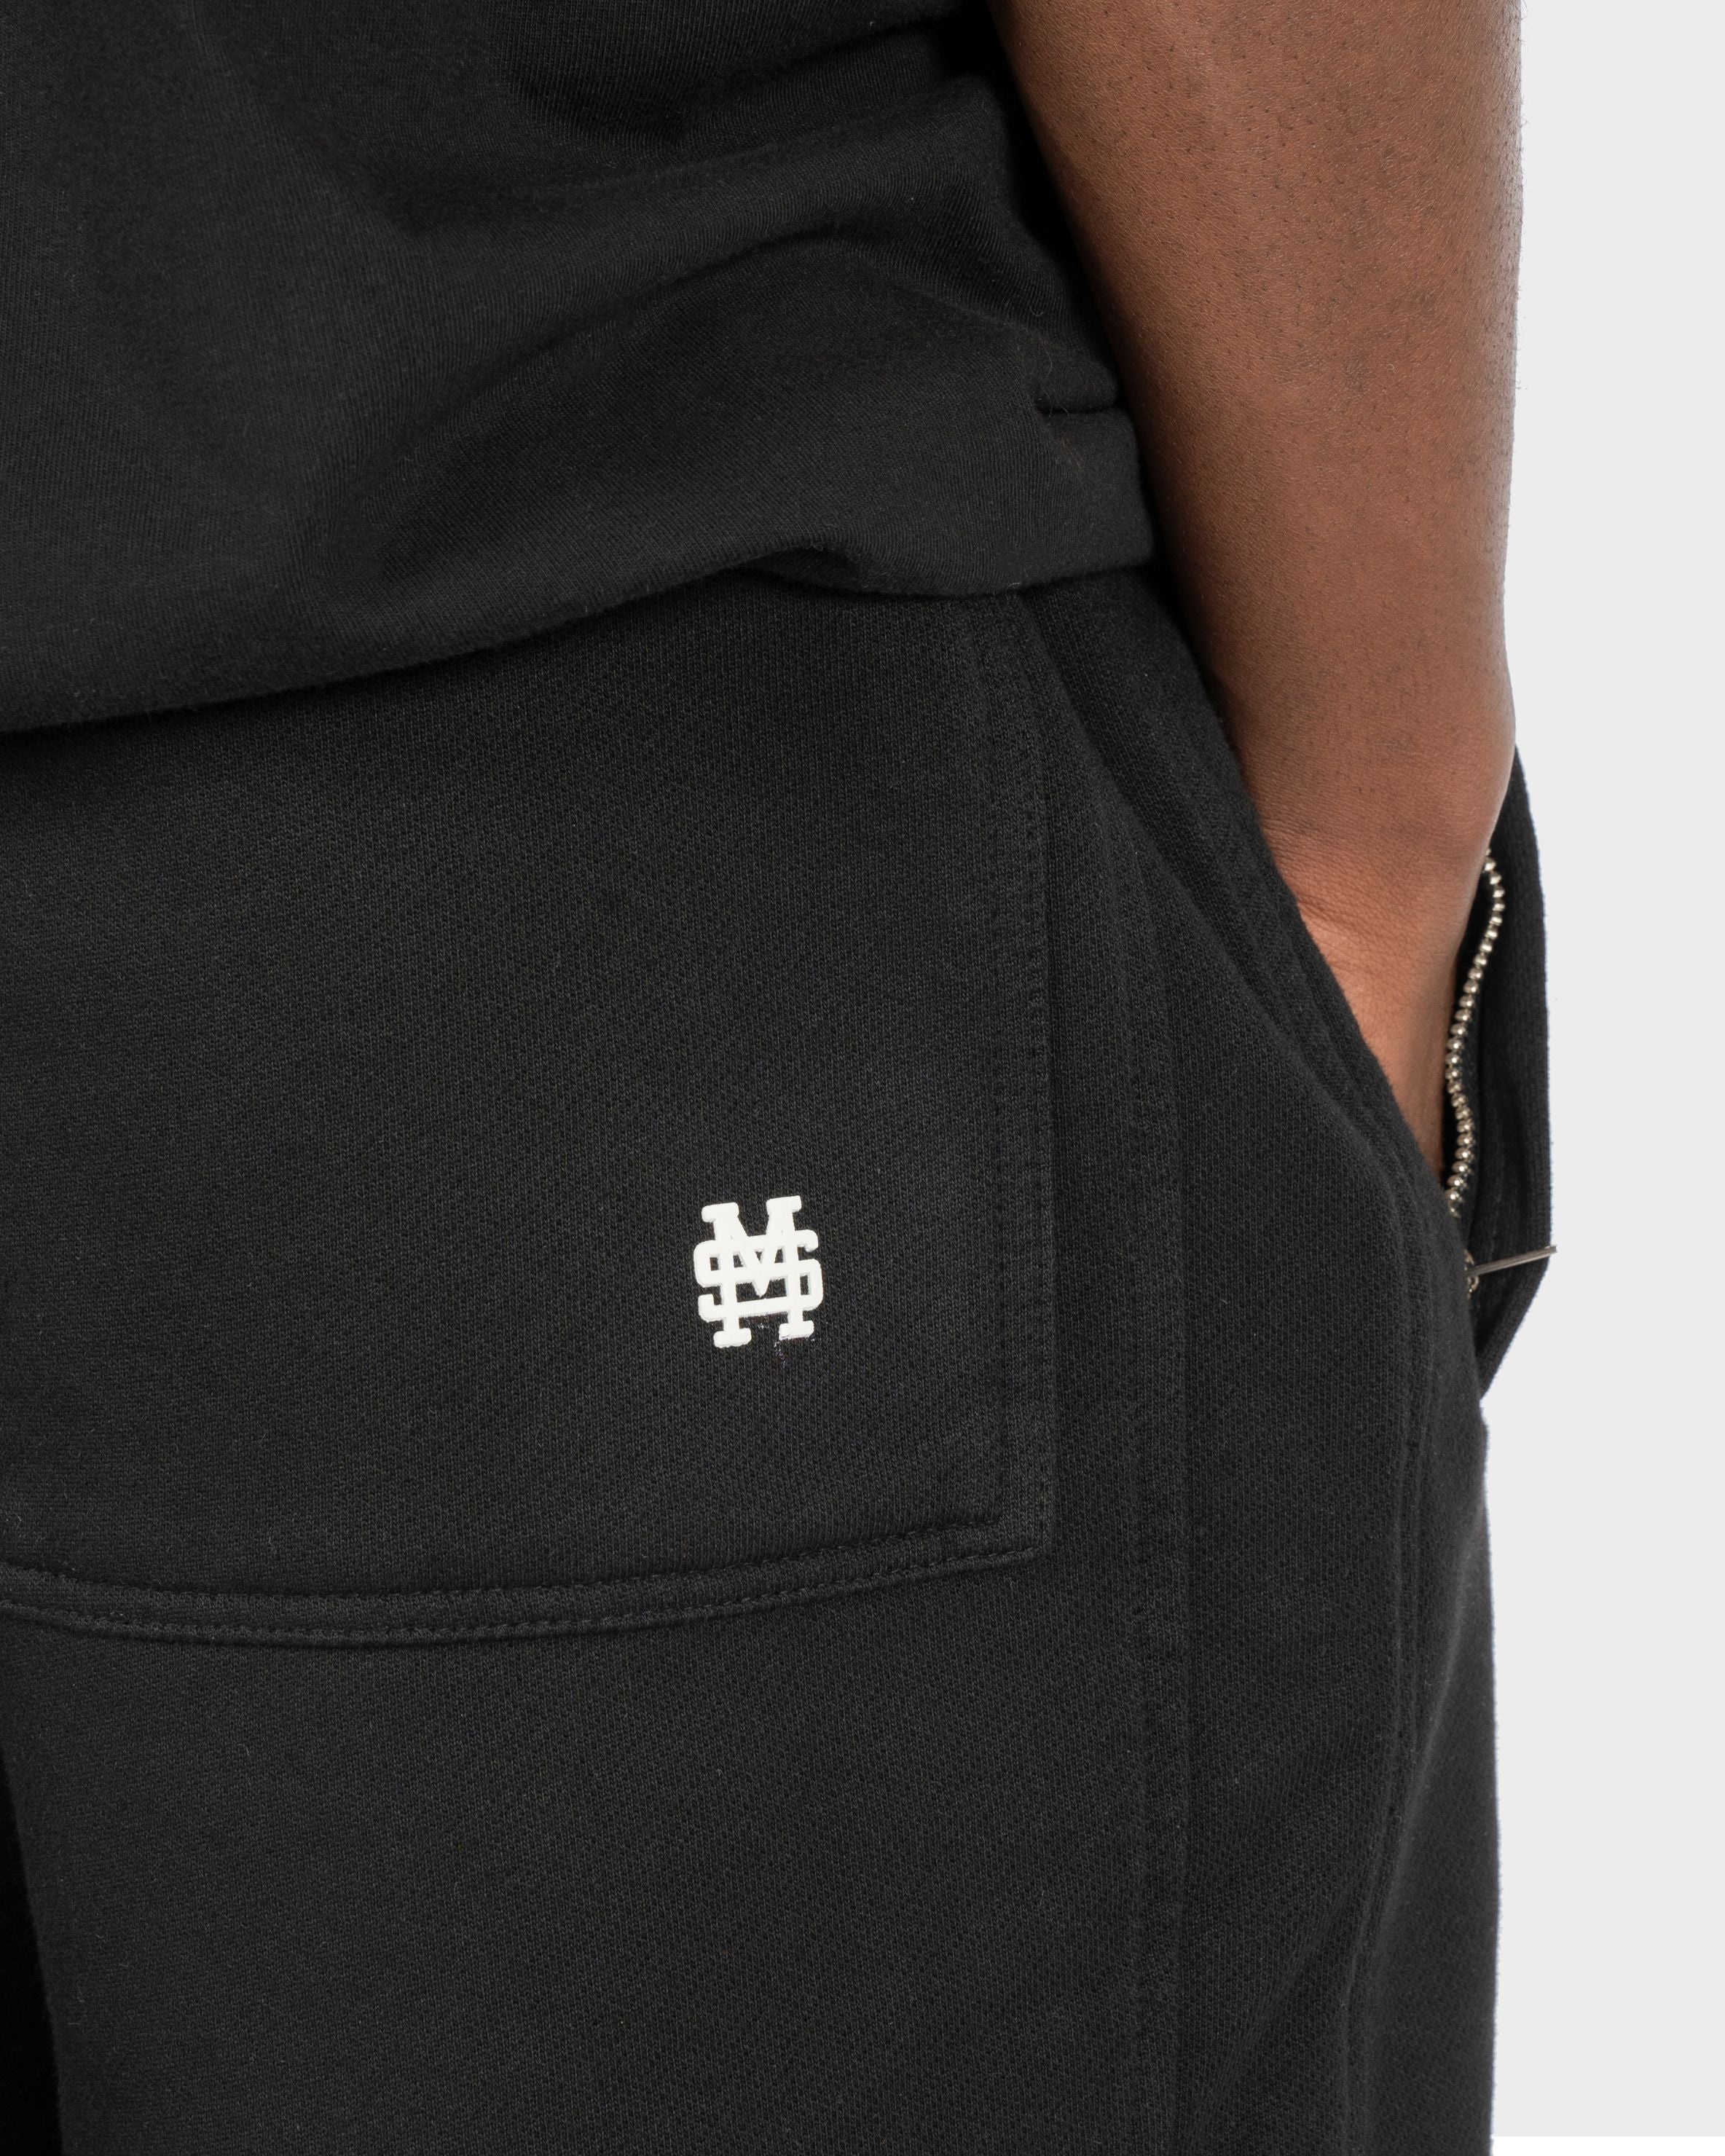 Represent Owners Club Mesh Shorts | Black Shorts Owners Club | Represent Cl